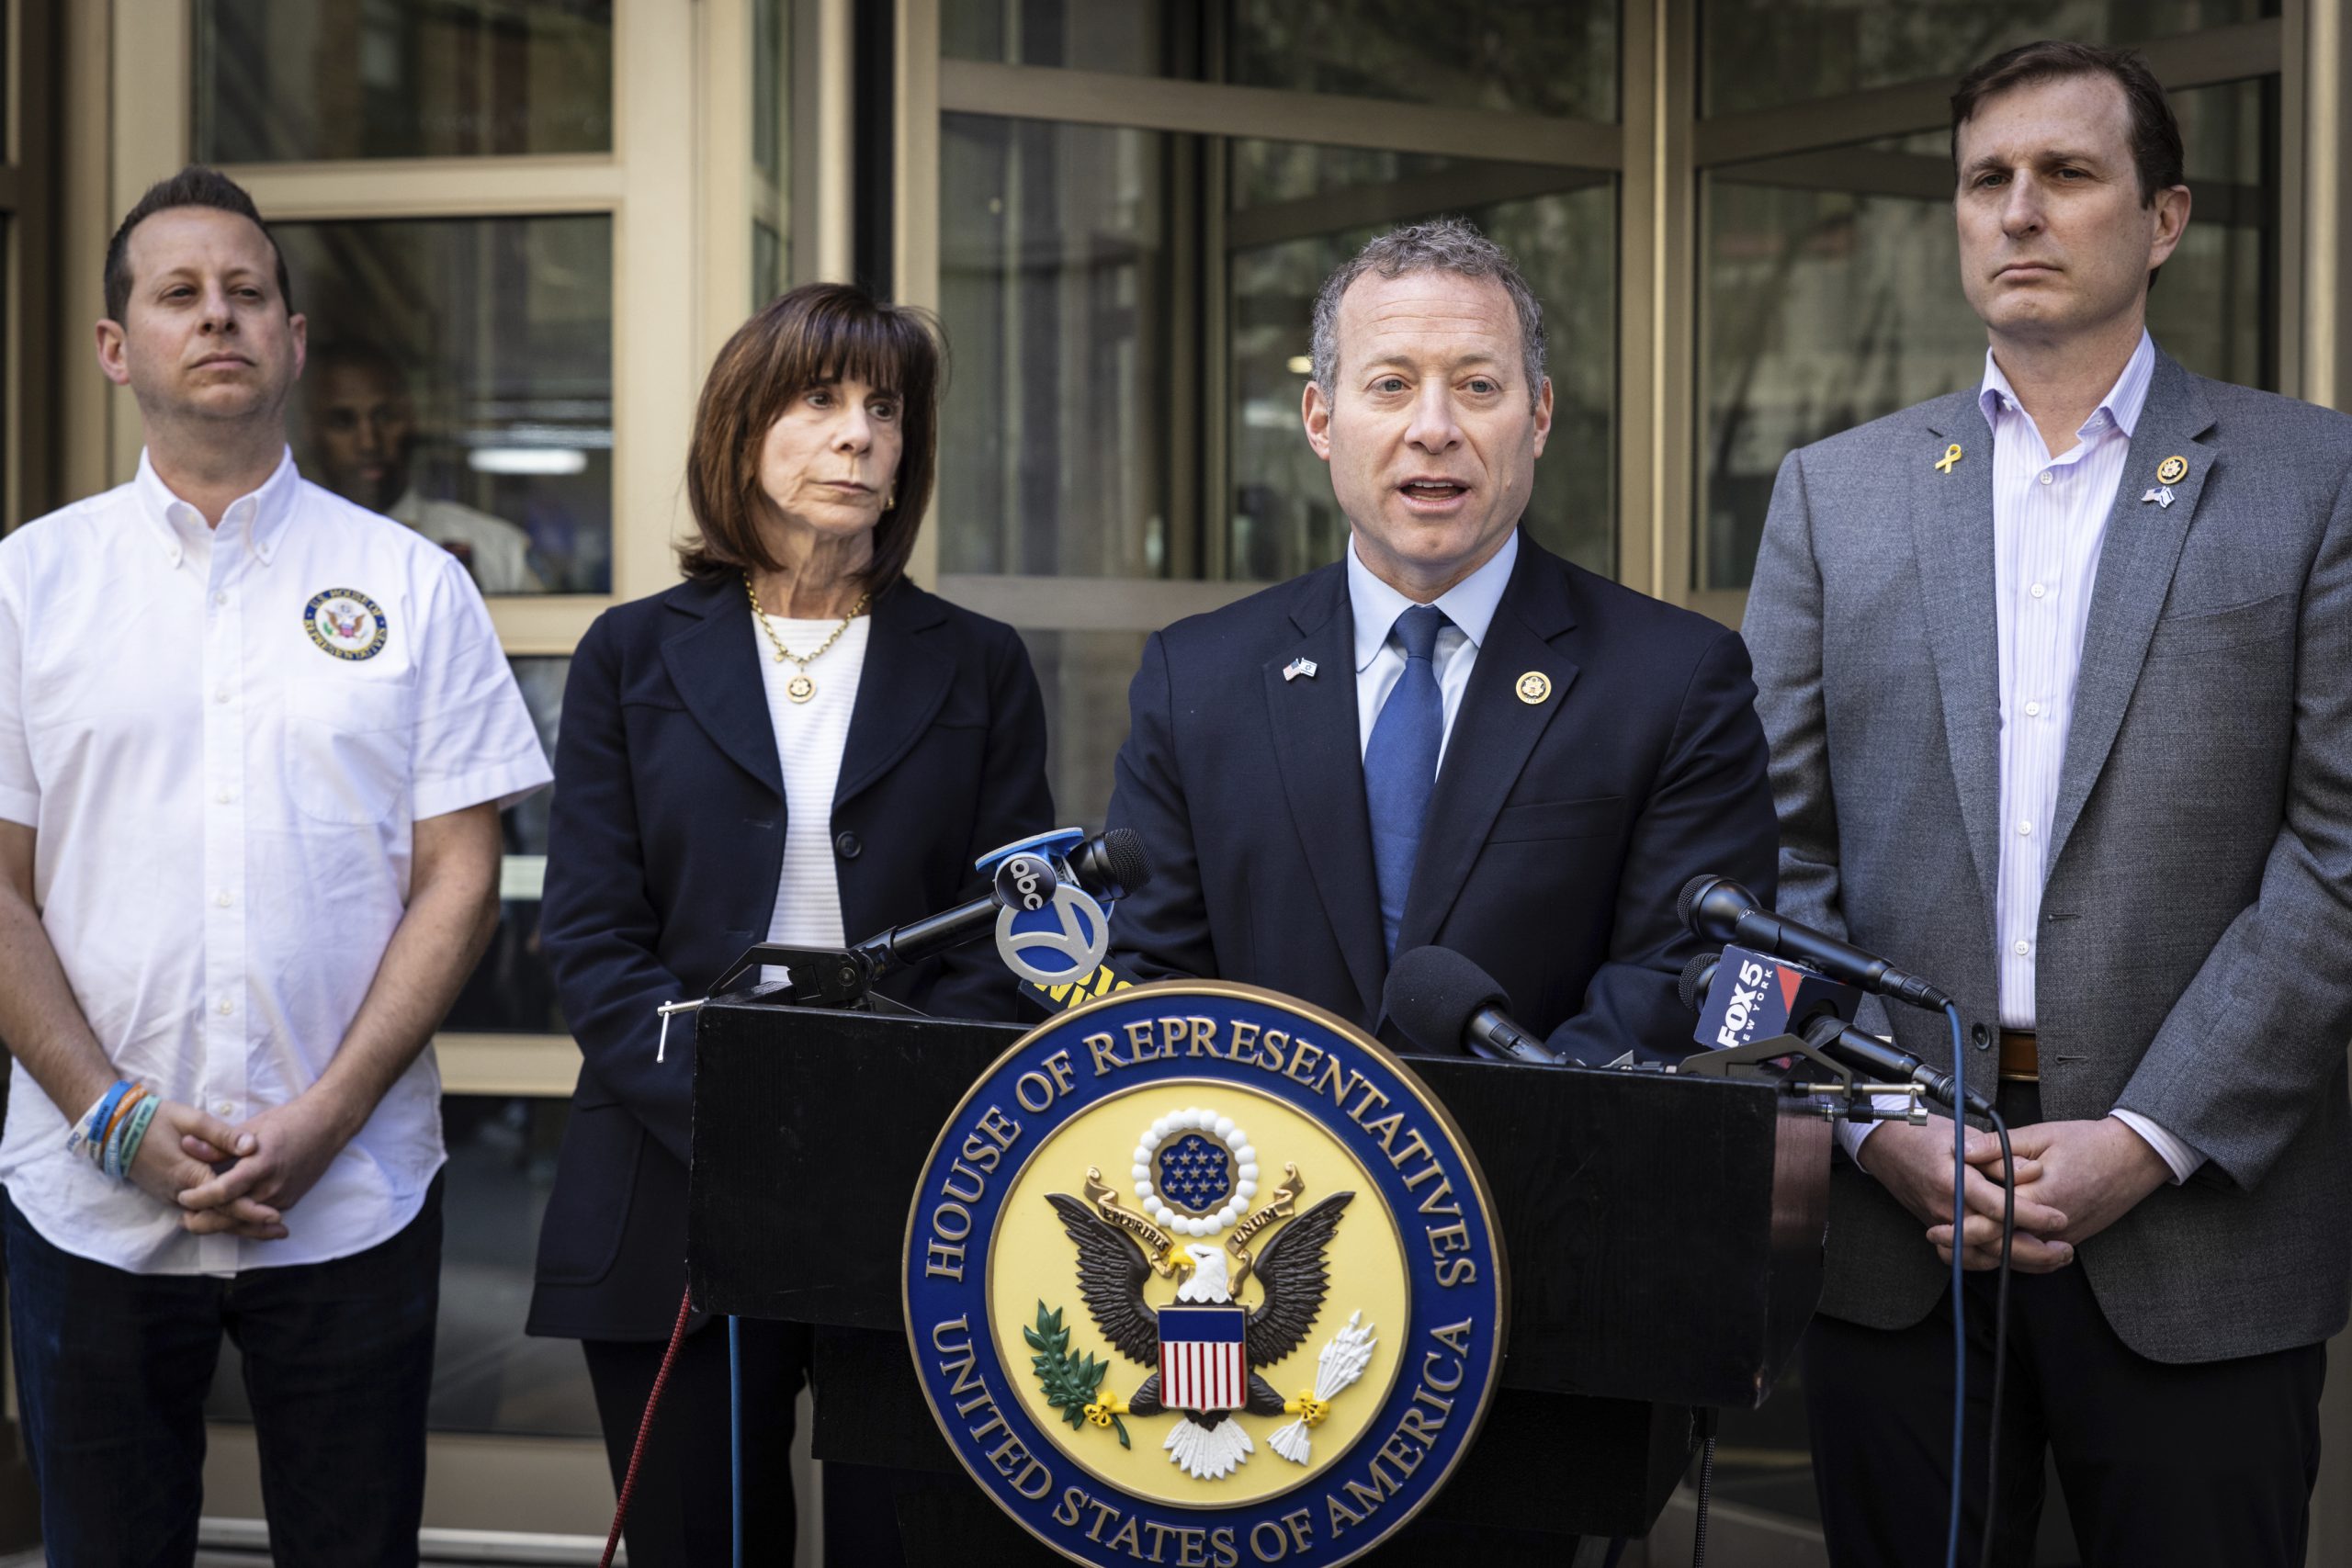 Josh Gottheimer called for an end to the protests with, from left, fellow House Democrats Jared Moskowitz, Kathy Manning and Dan Goldman